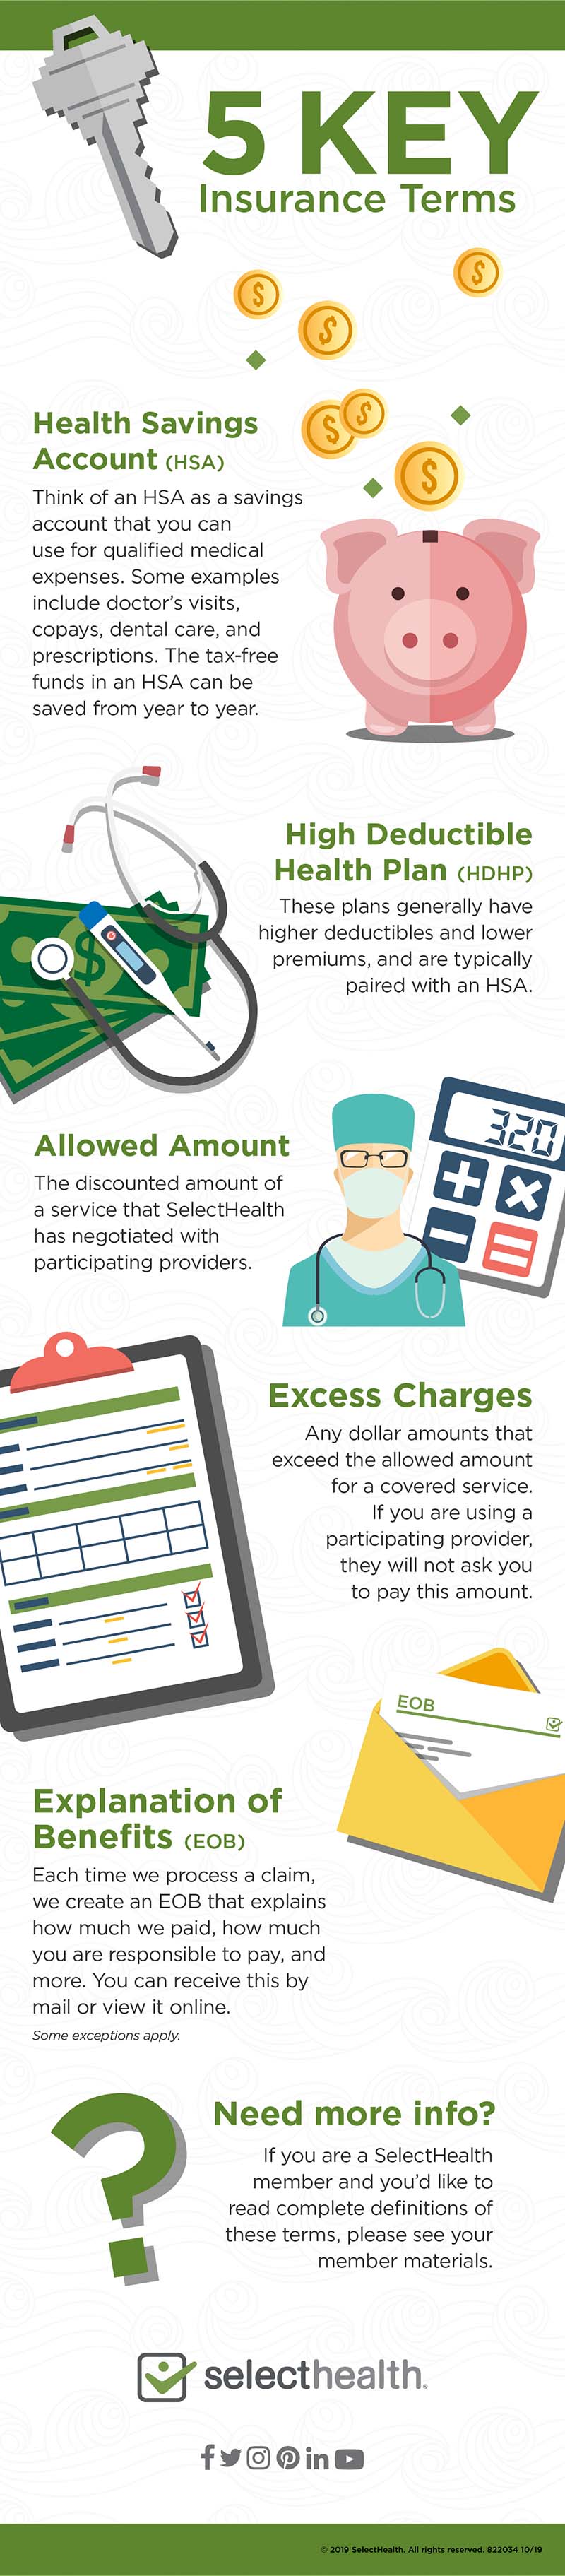 5 Key Insurance Terms Infographic: Health Savings Account (HSA), High Deductible Health Plan (HDHP), Allowed Amount, Excess Charges, Explanation of Benefits (EOB)